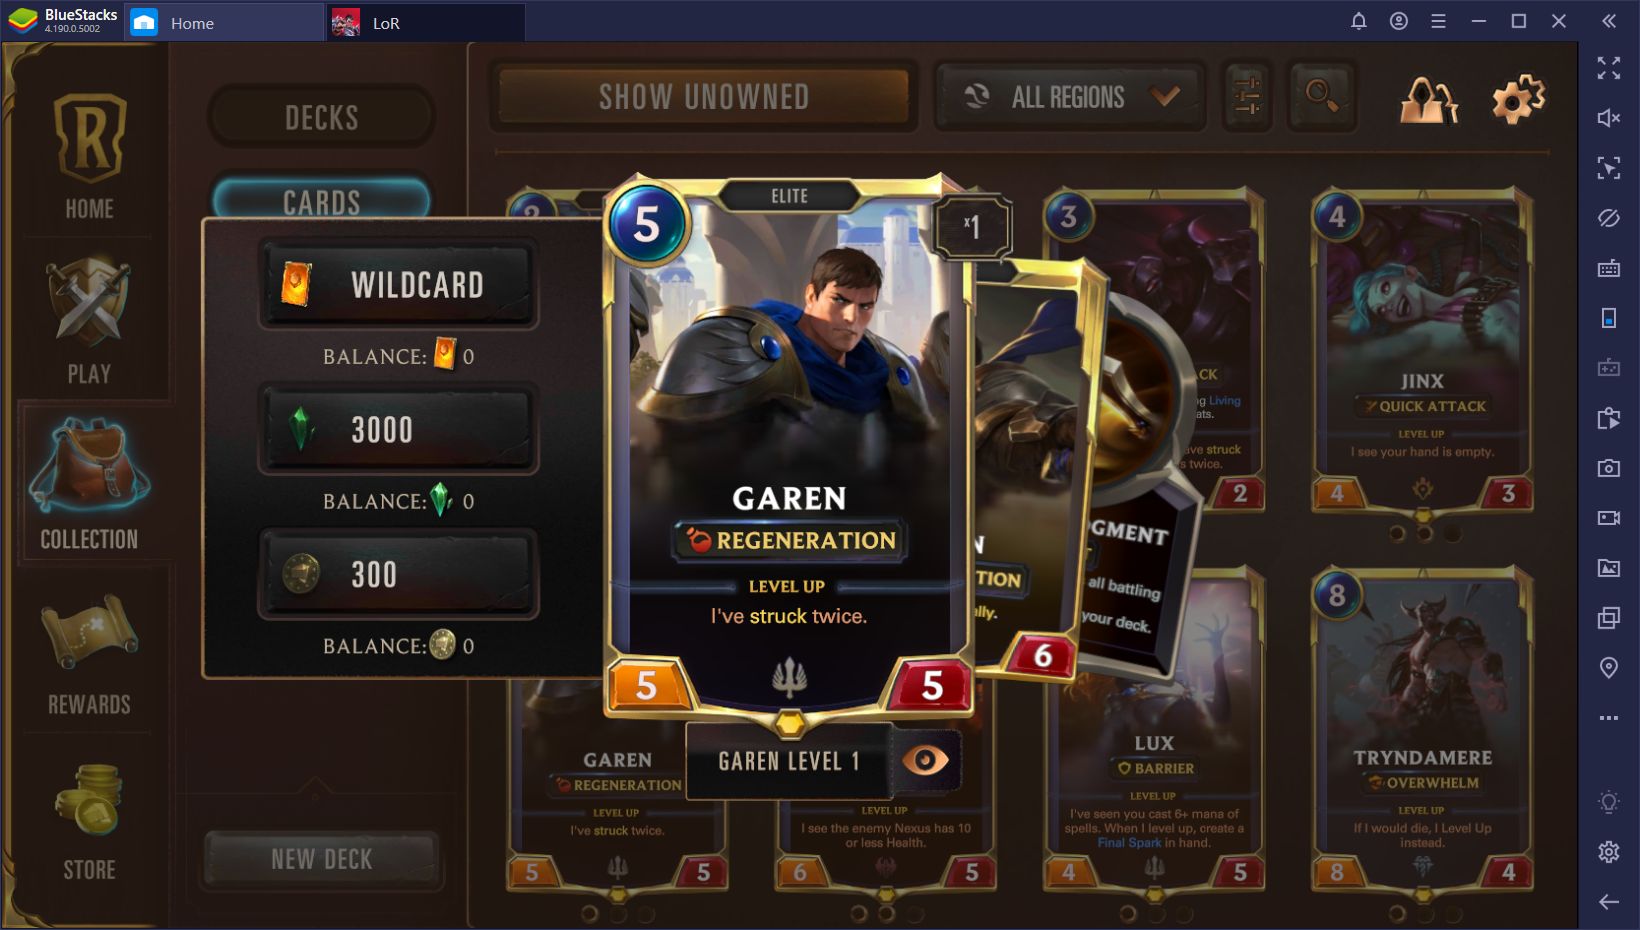 The Best Champion Cards in Legends of Runeterra (April 2020)